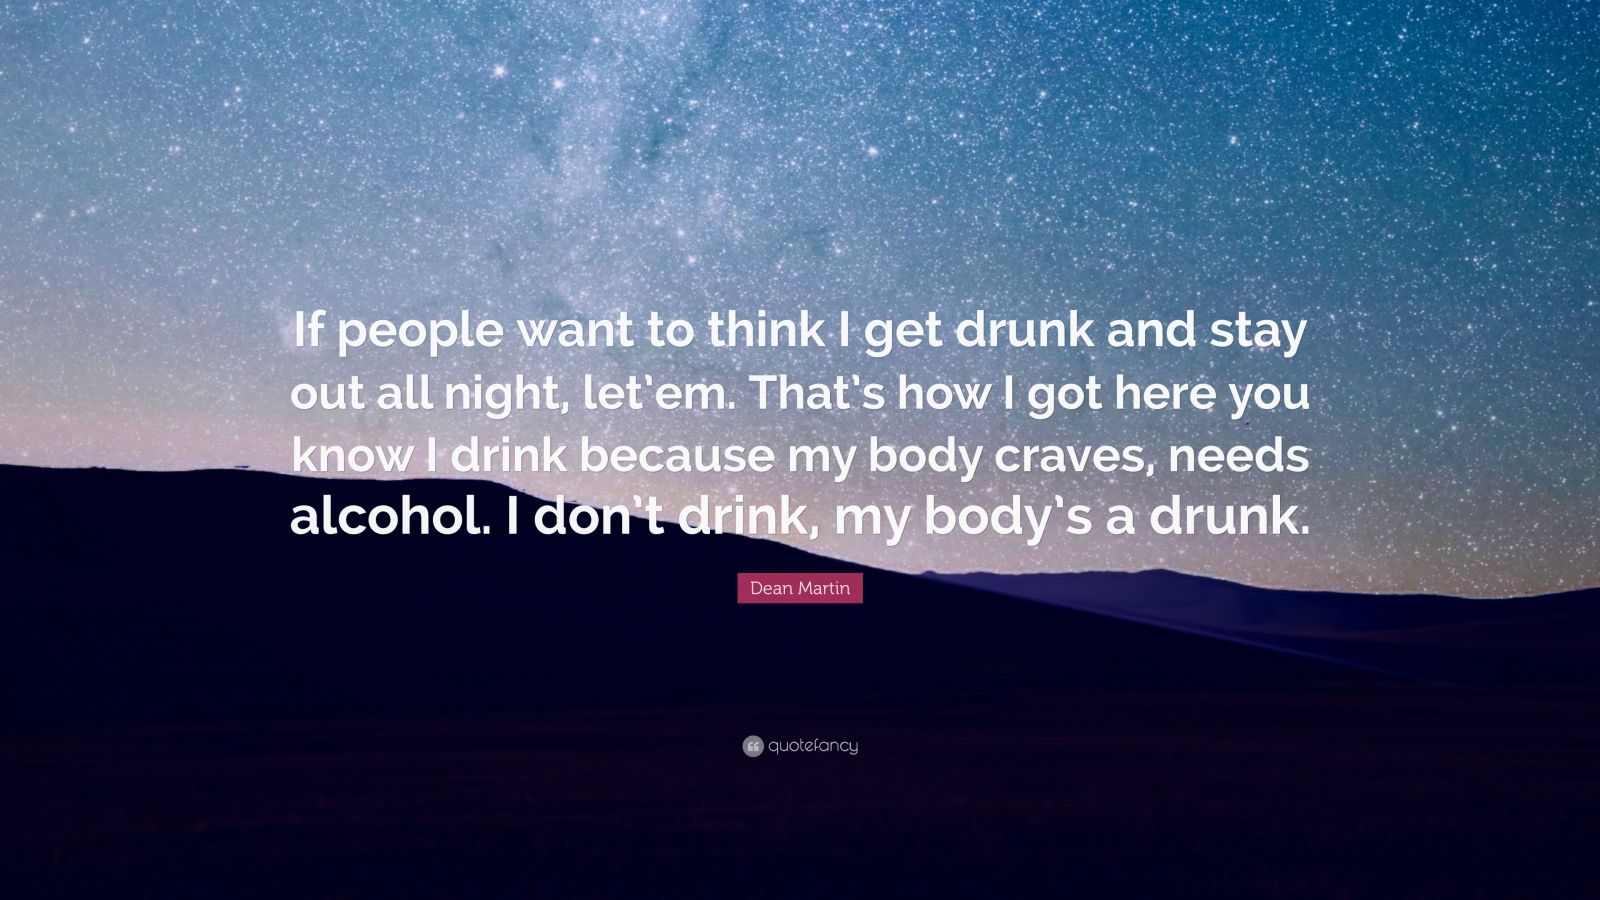 Dean Martin Quote: “If people want to think I get drunk and stay out all night, let’em. That’s how I got here you know I drink because my body craves, needs alcohol. I don’t drink, my body’s a drunk.”